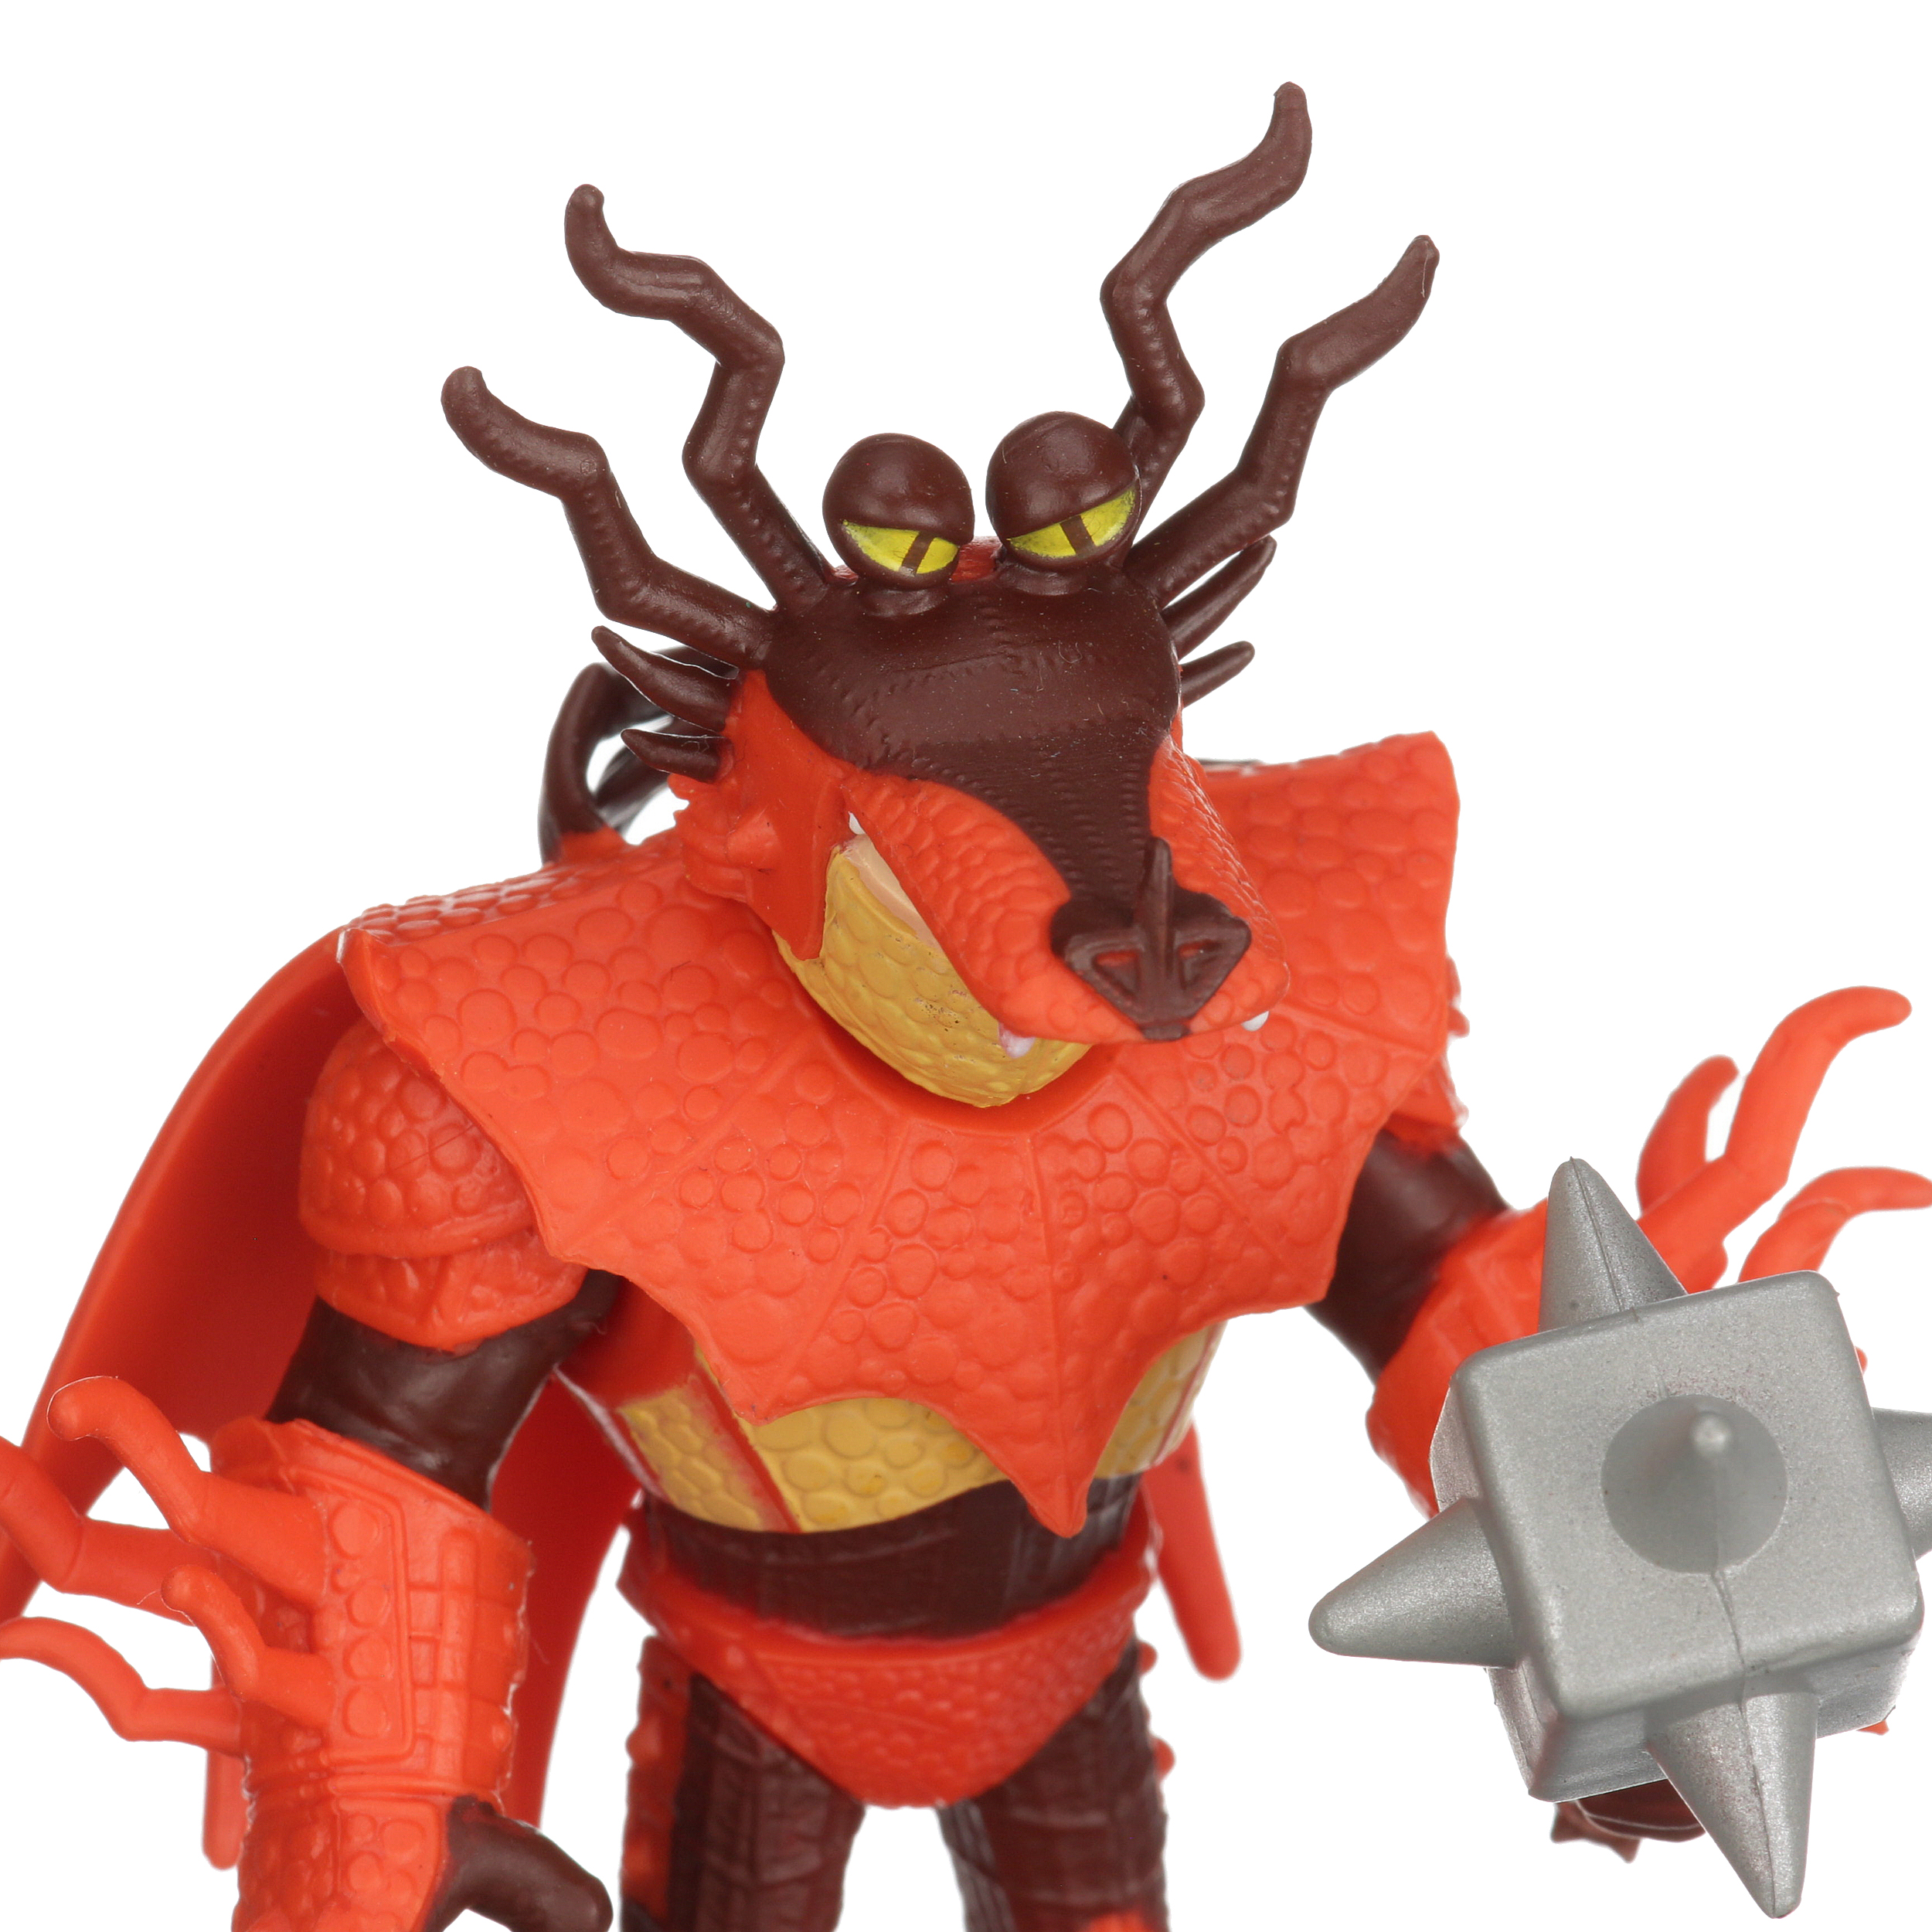 DreamWorks Dragons, Hookfang and Snotlout, Dragon with Armored Viking Figure, for Kids Aged 4 and Up - image 4 of 7